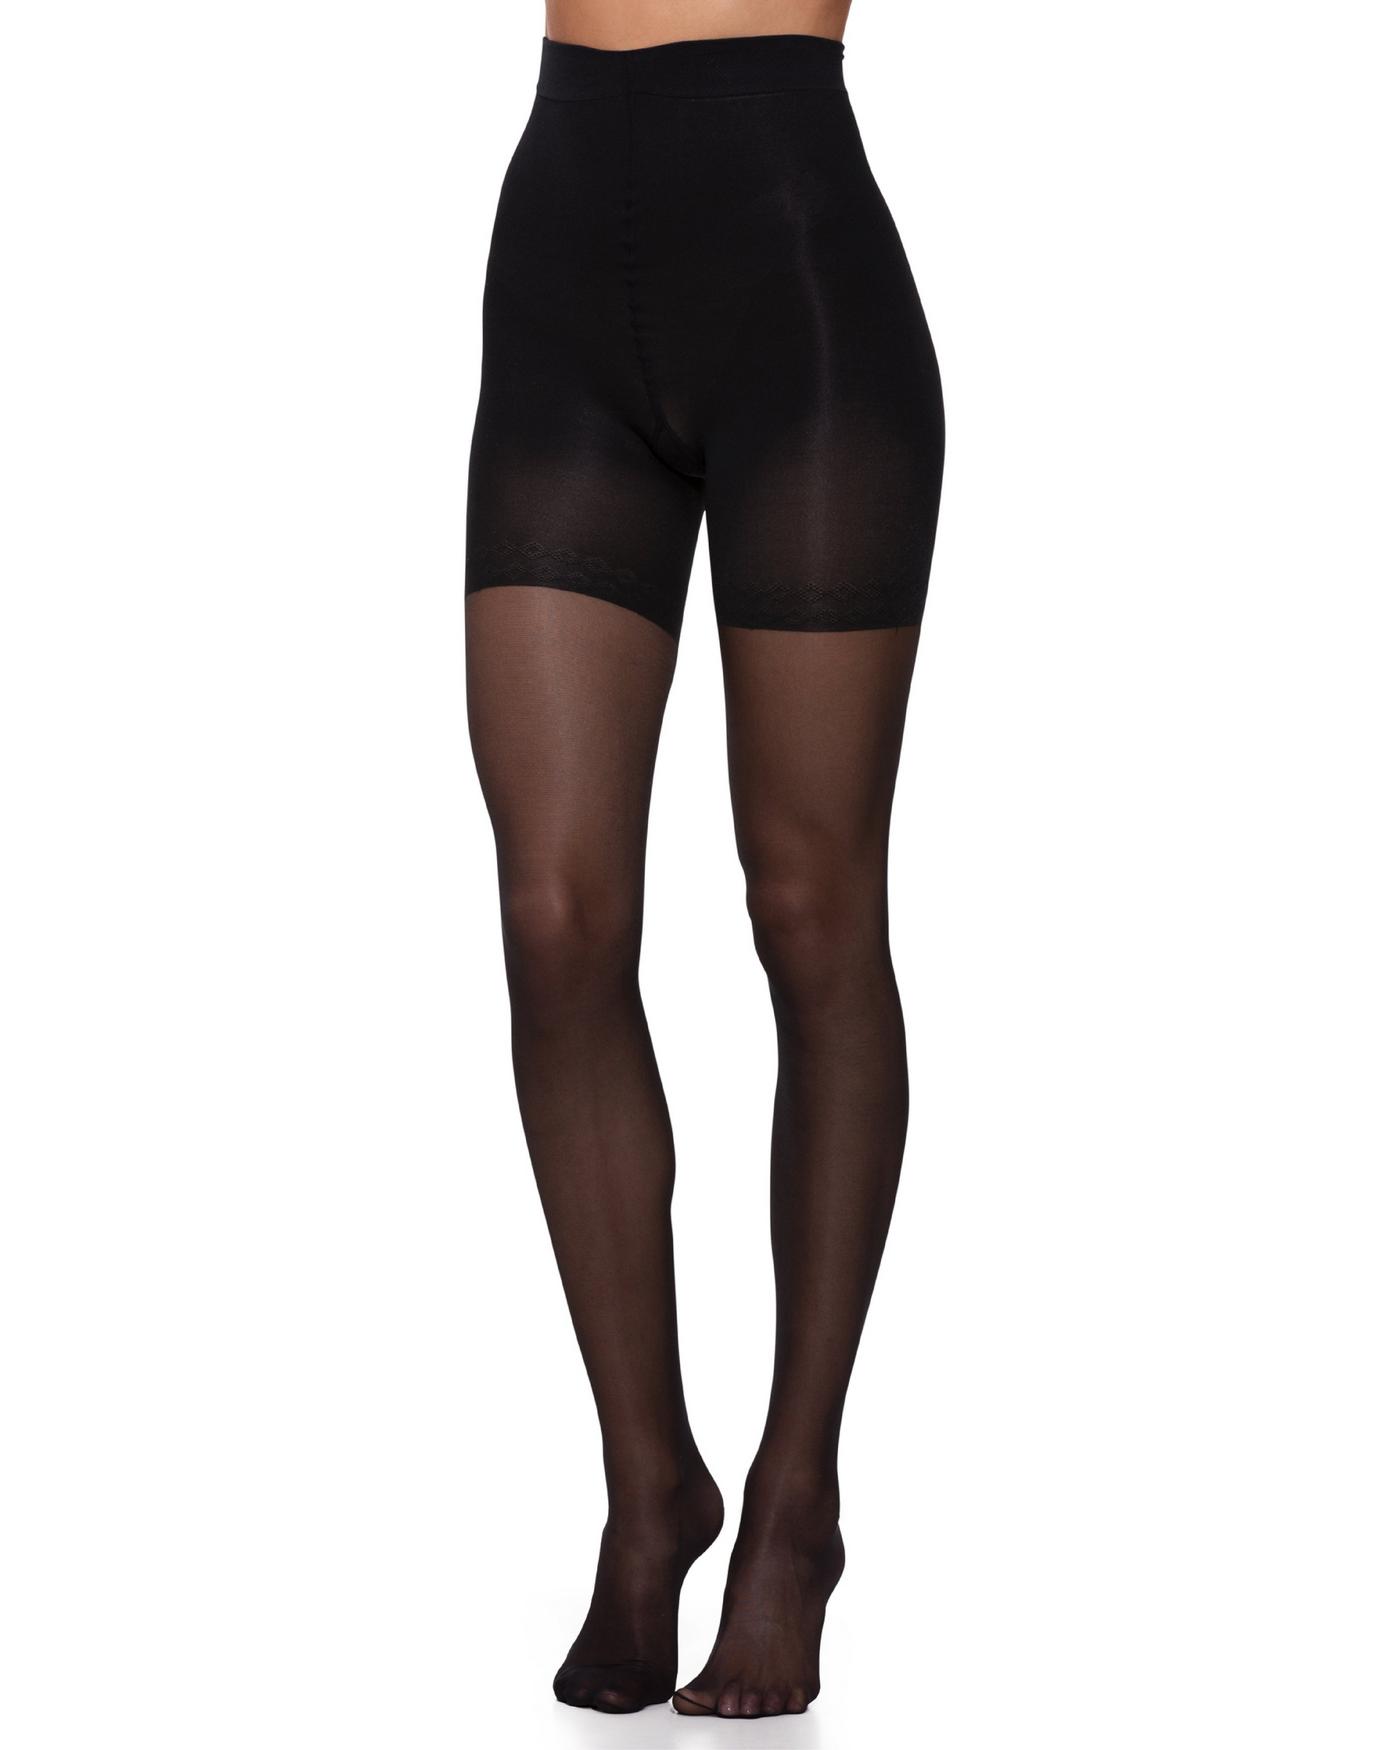 High-rise opaque body-shaping tights